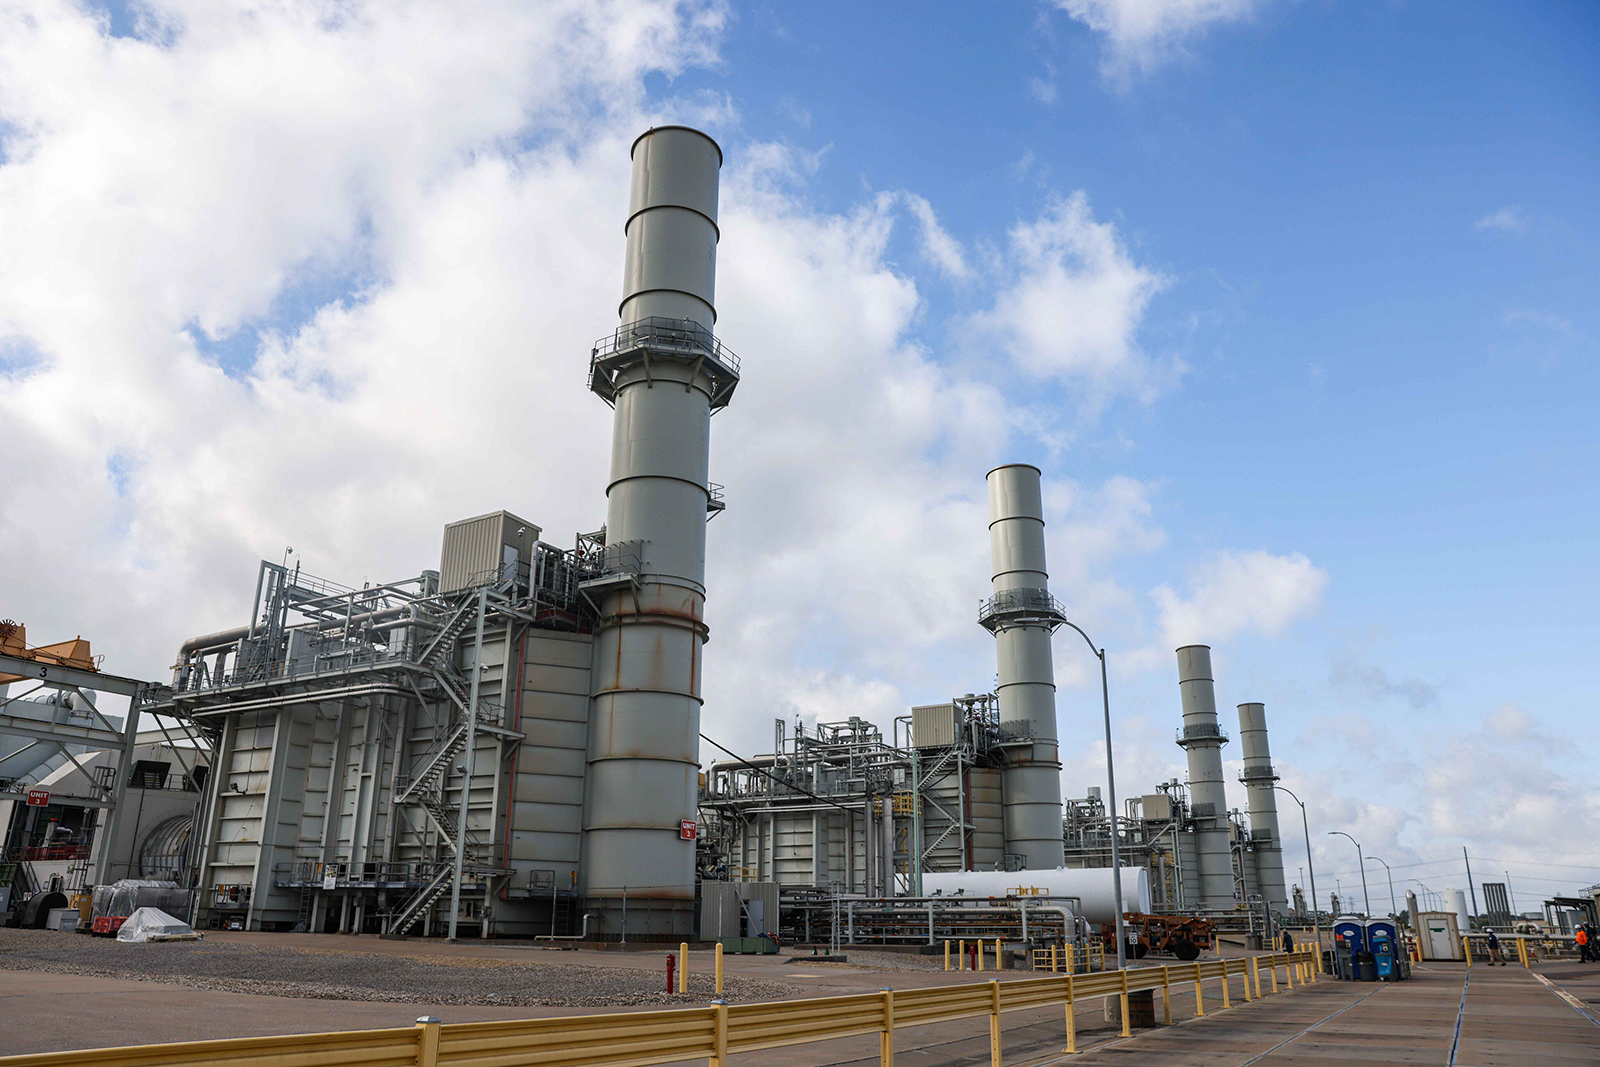 Energy regulators approved an incentive program to build natural gas-fueled power plants,...